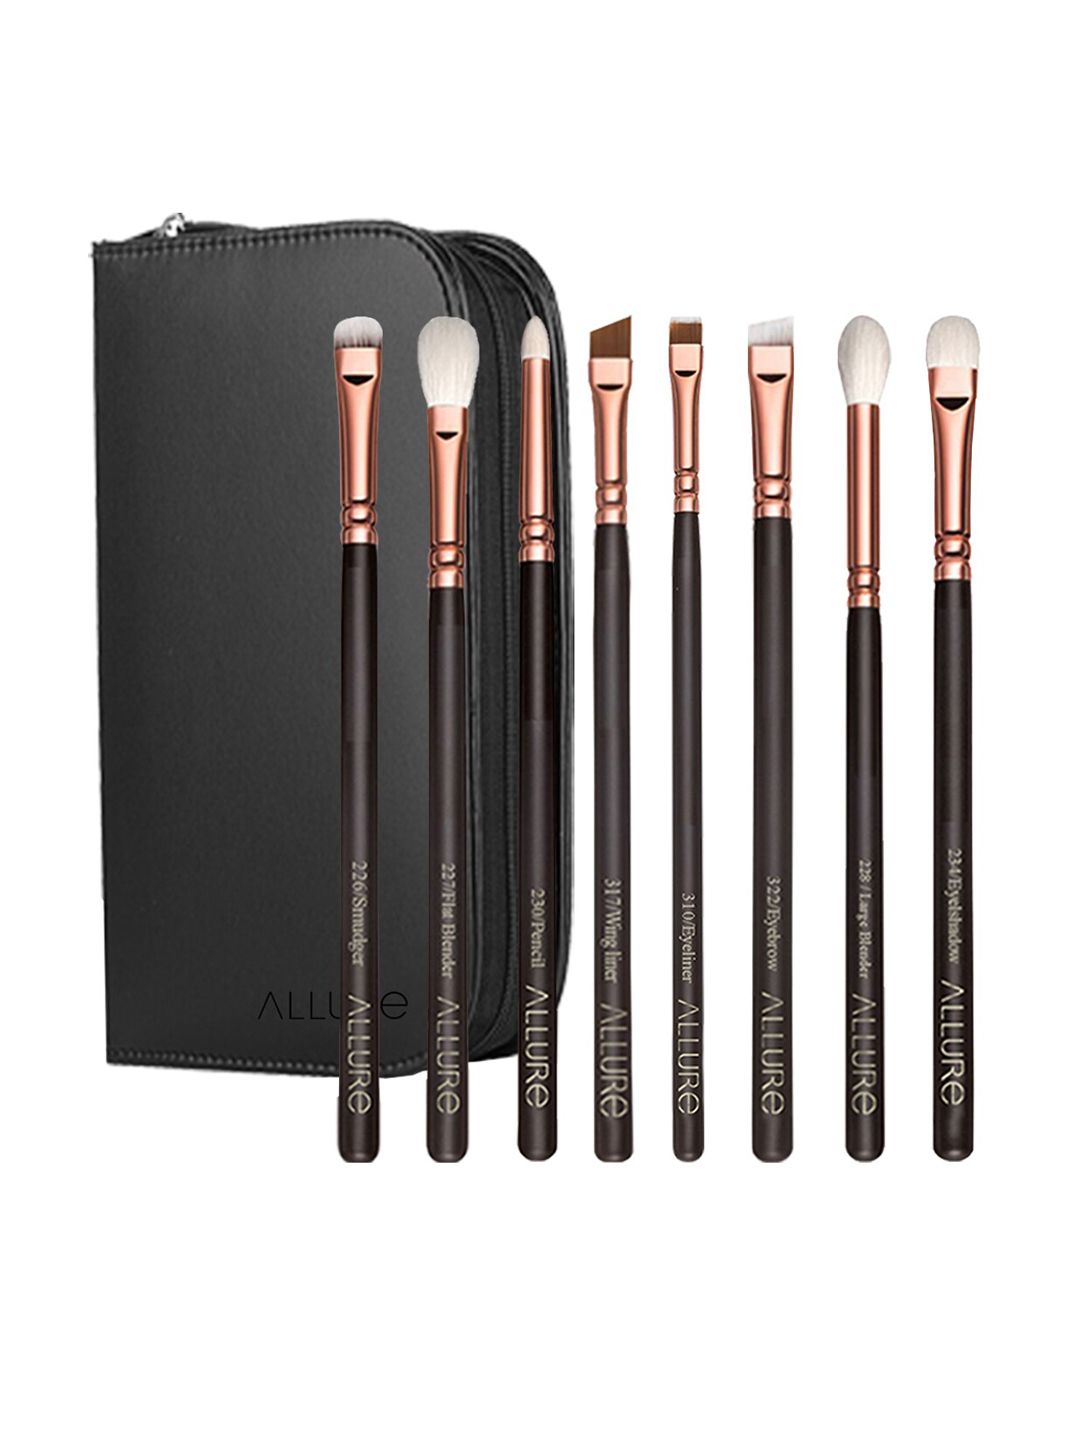 ALLURE Essential Set of 8 Professional Eye Brushes - RGKE 08 Price in India